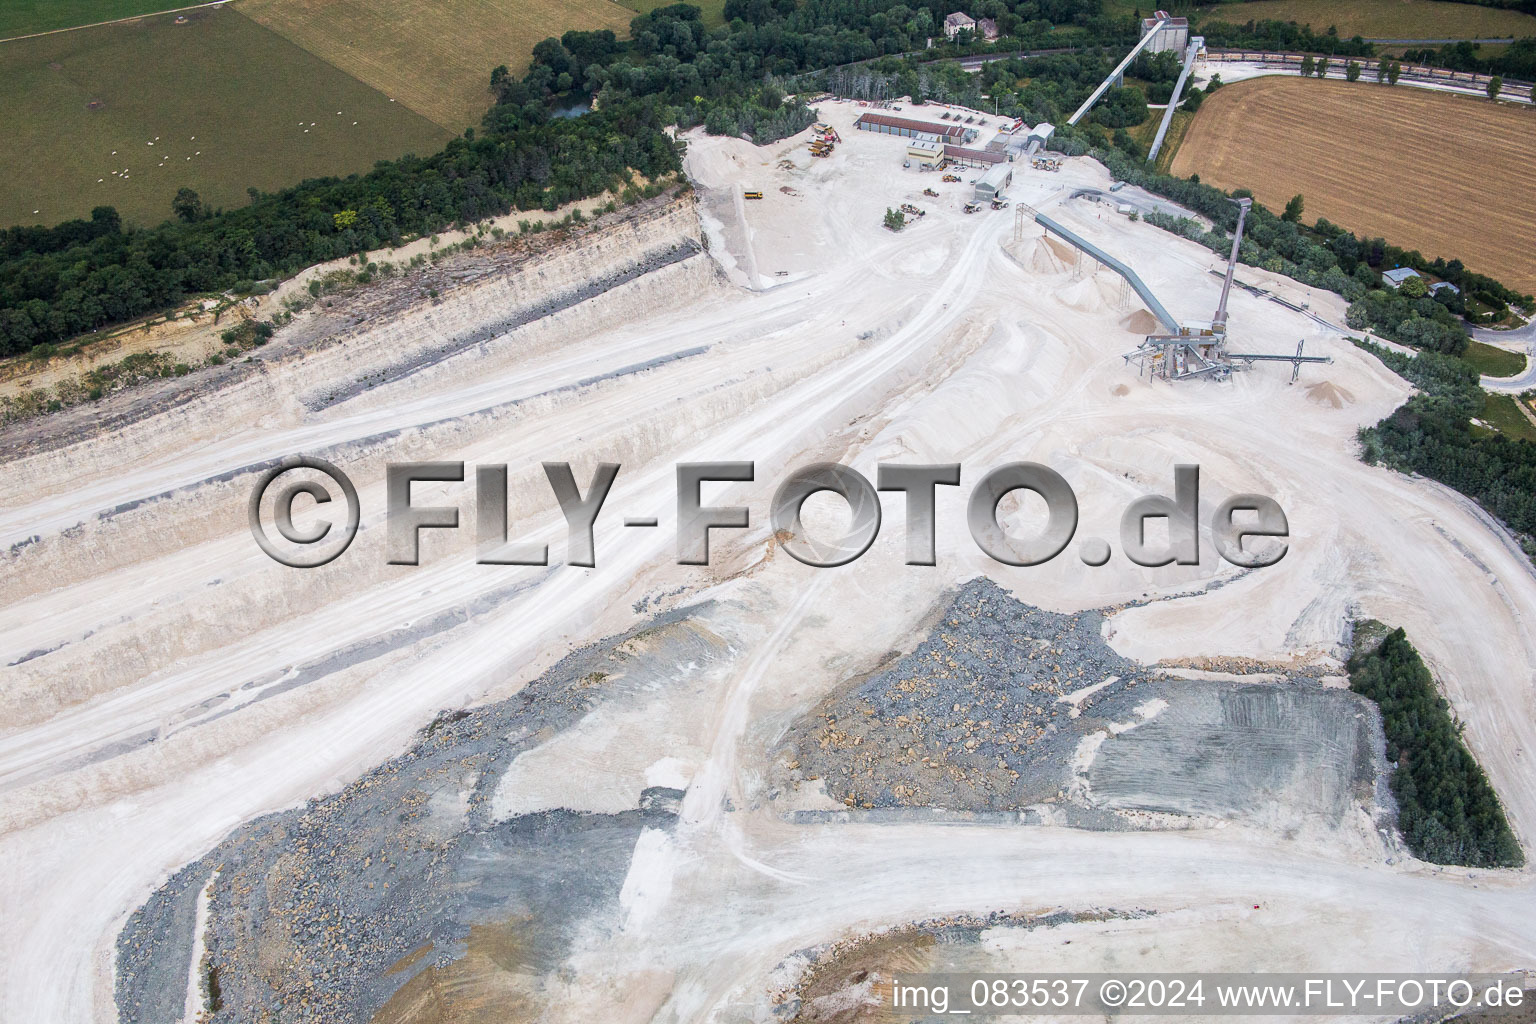 Site and Terrain of overburden surfaces Cement opencast mining Novacarb in Pagny-sur-Meuse in Grand Est, France